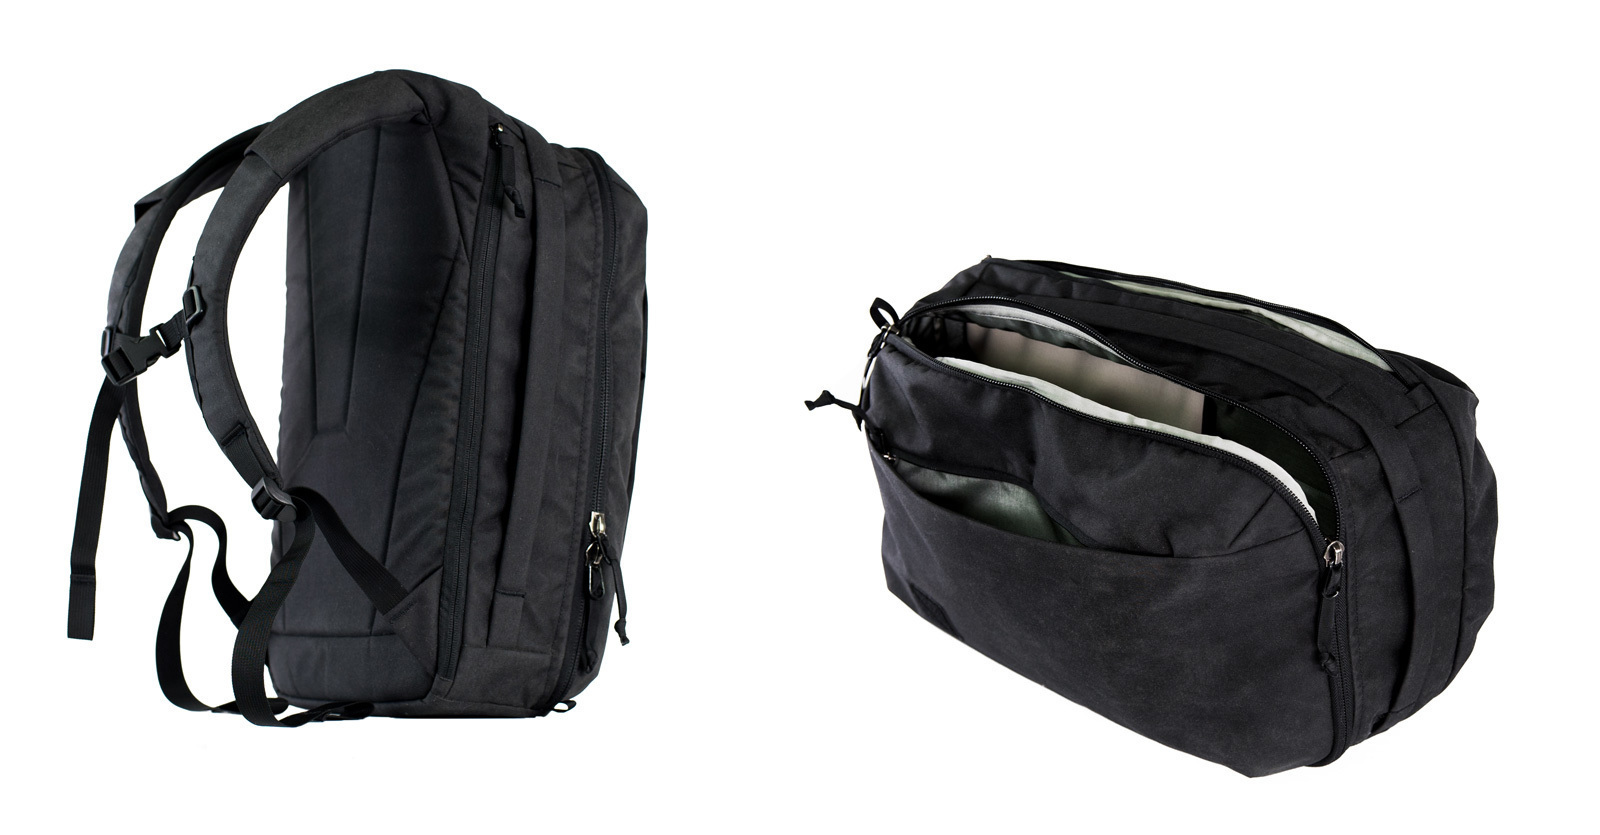 evergoods crossover bags side